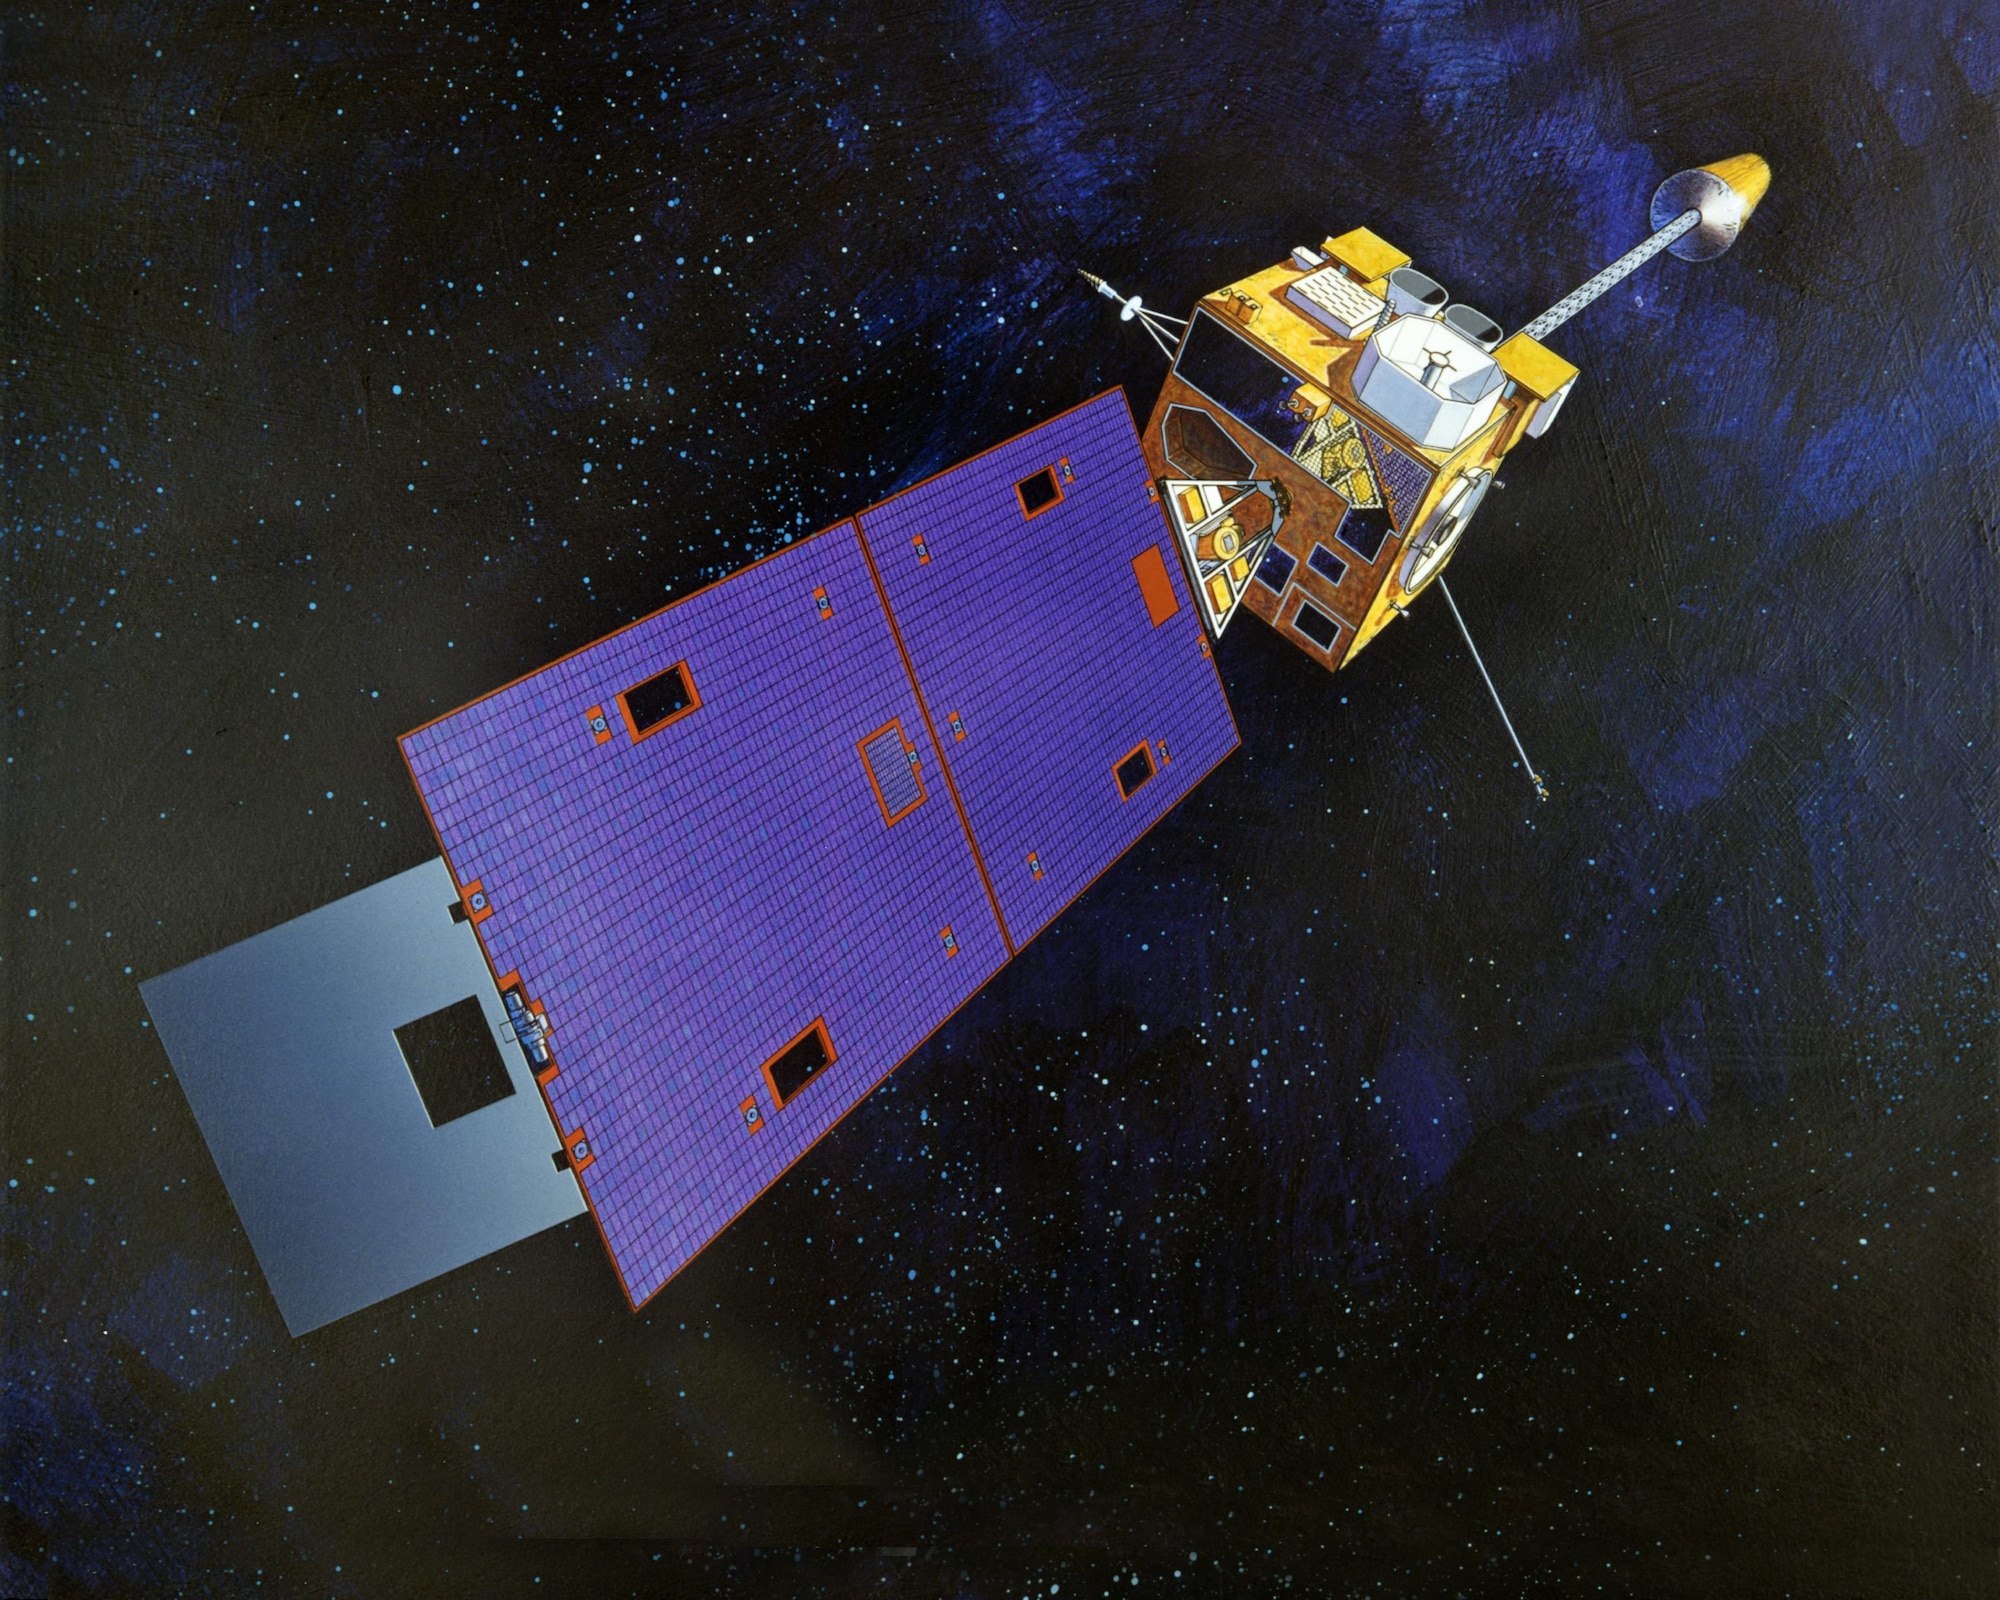 Global Positioning System Block IIF satellite (United States Government photo)